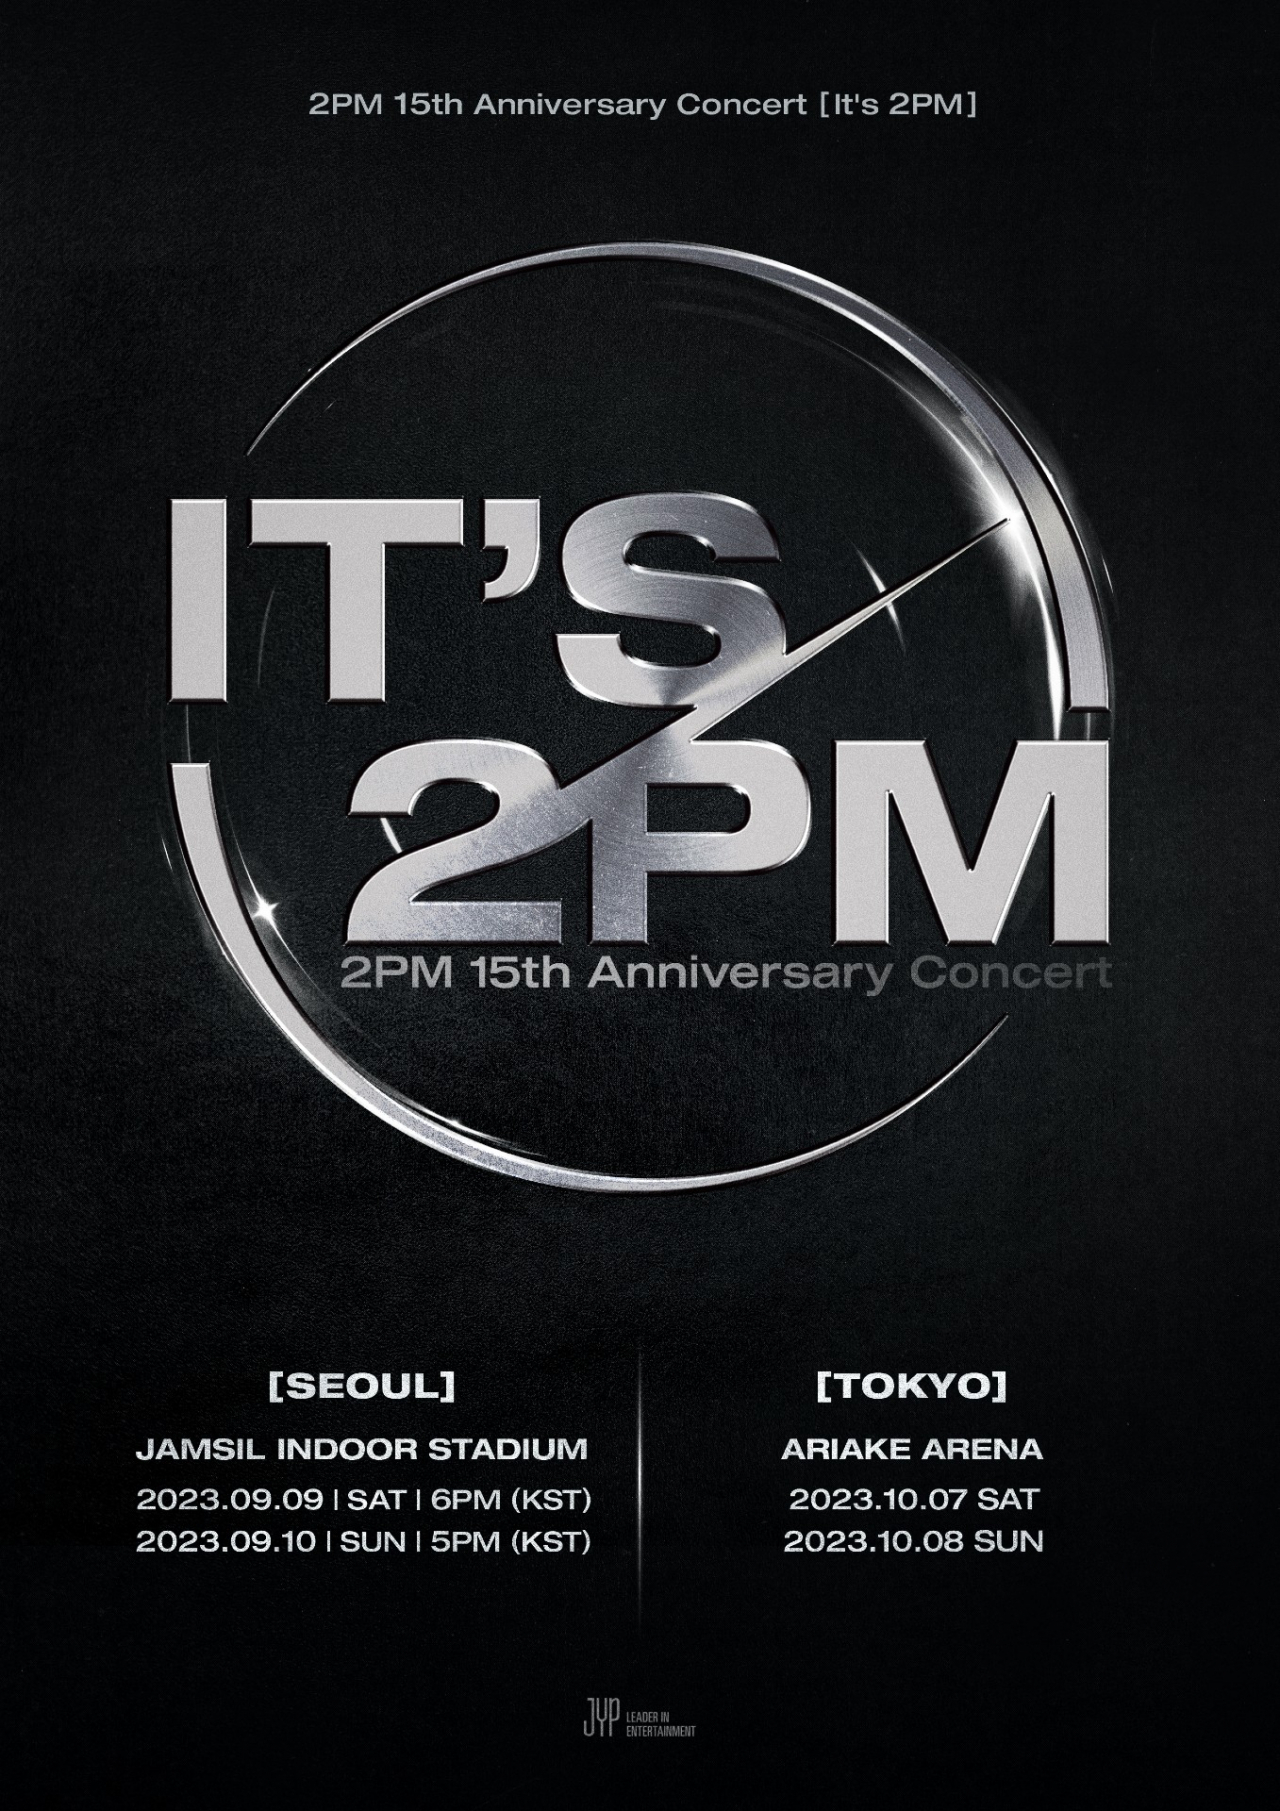 2PM to hold 15th-anniversary concerts in Seoul, Tokyo